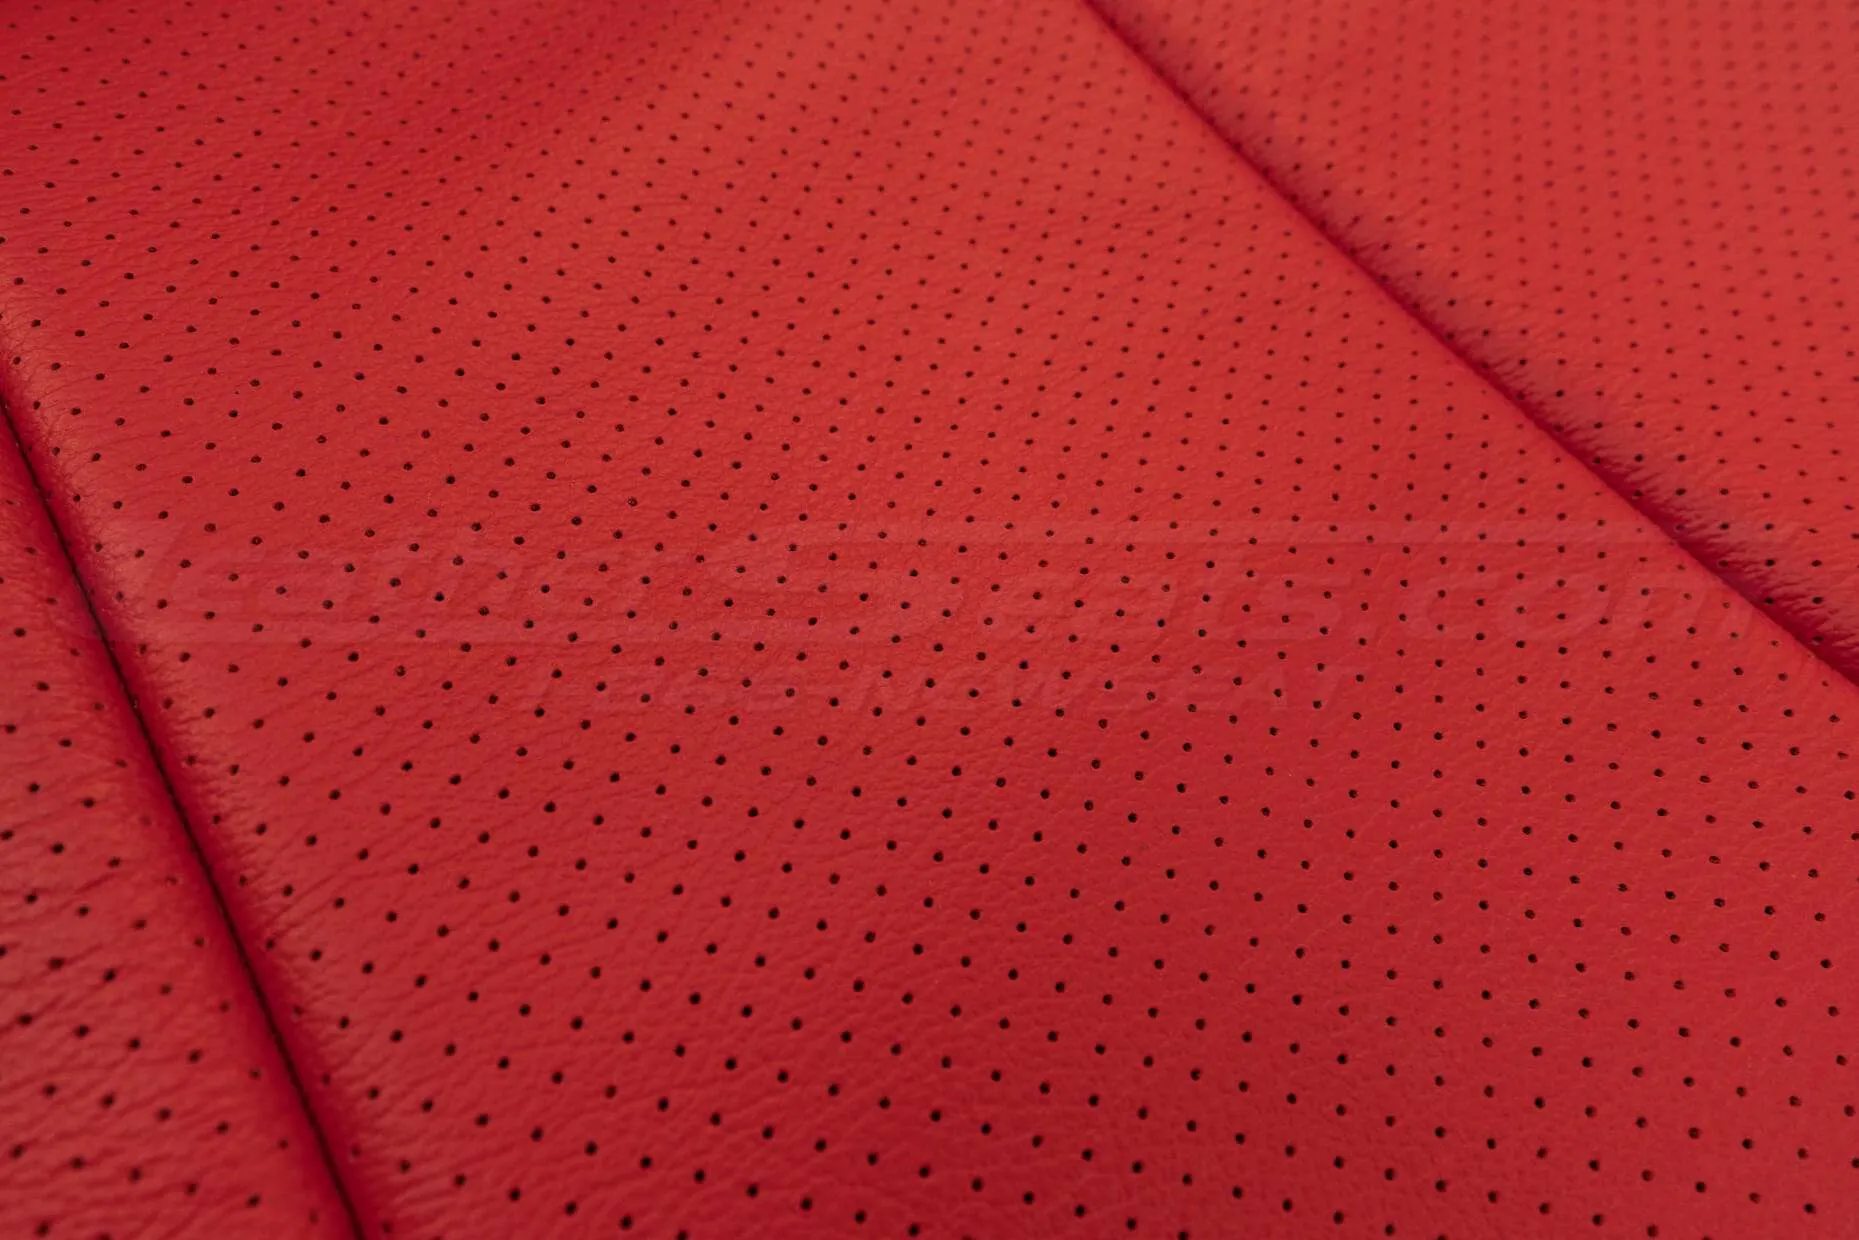 Chevrolet Camaro Leather Kit - Black & Bright Red - Perforation close-up